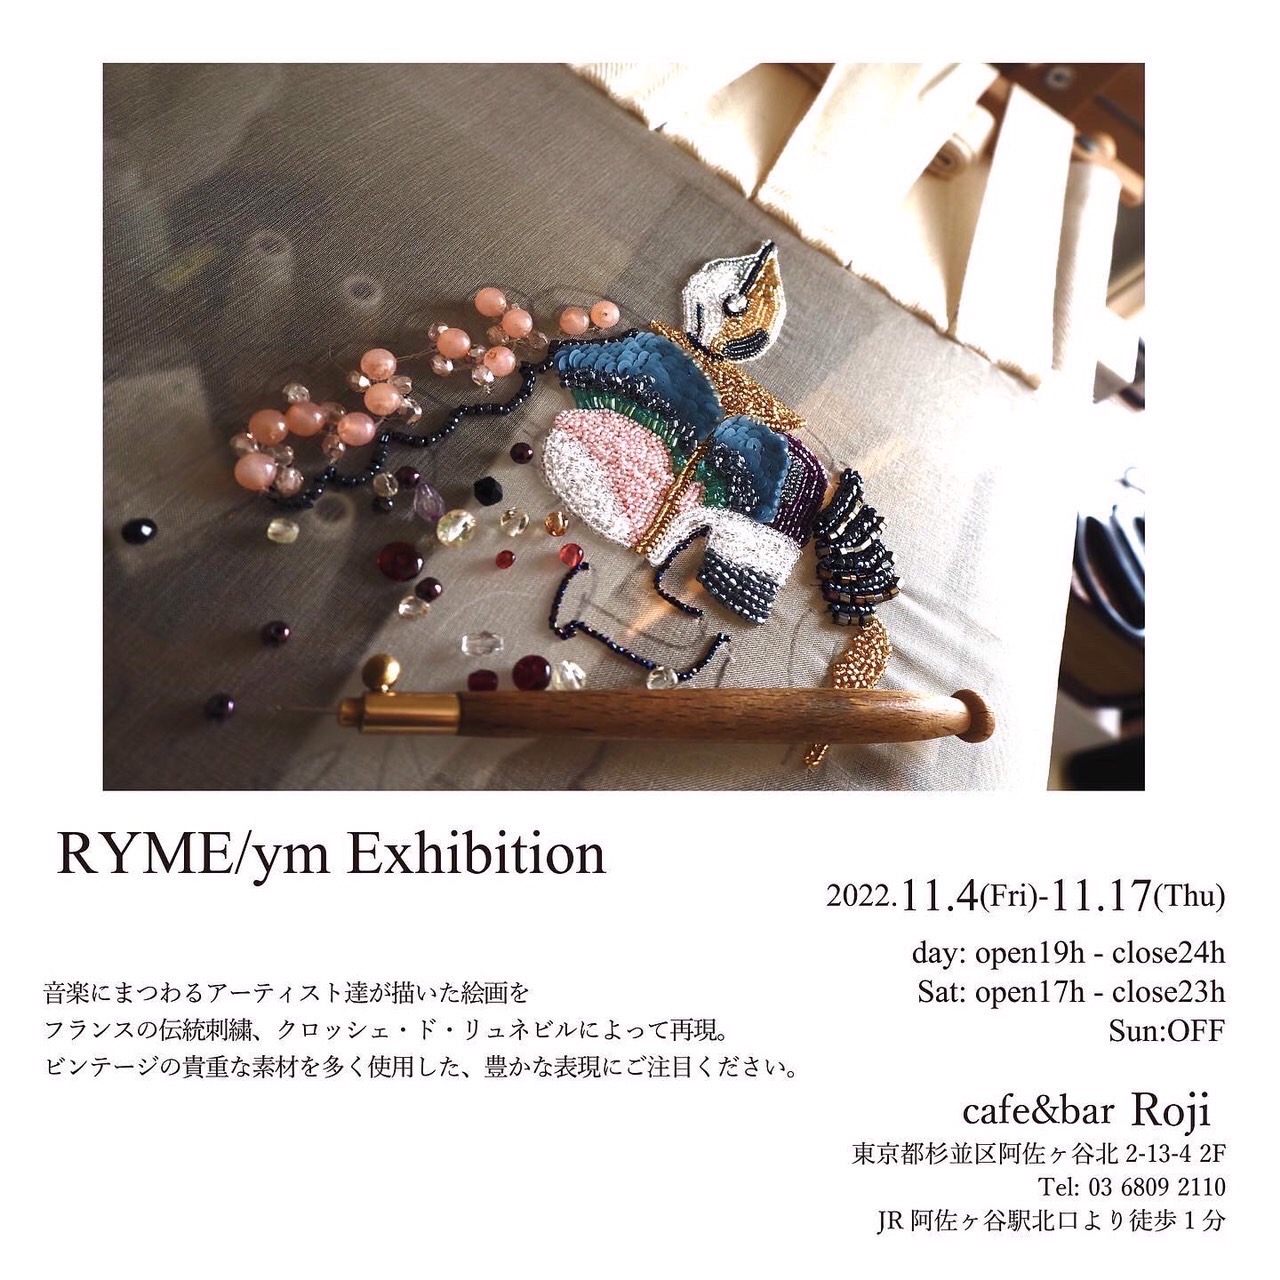 RYME/ym exhibition「音楽と刺繍」